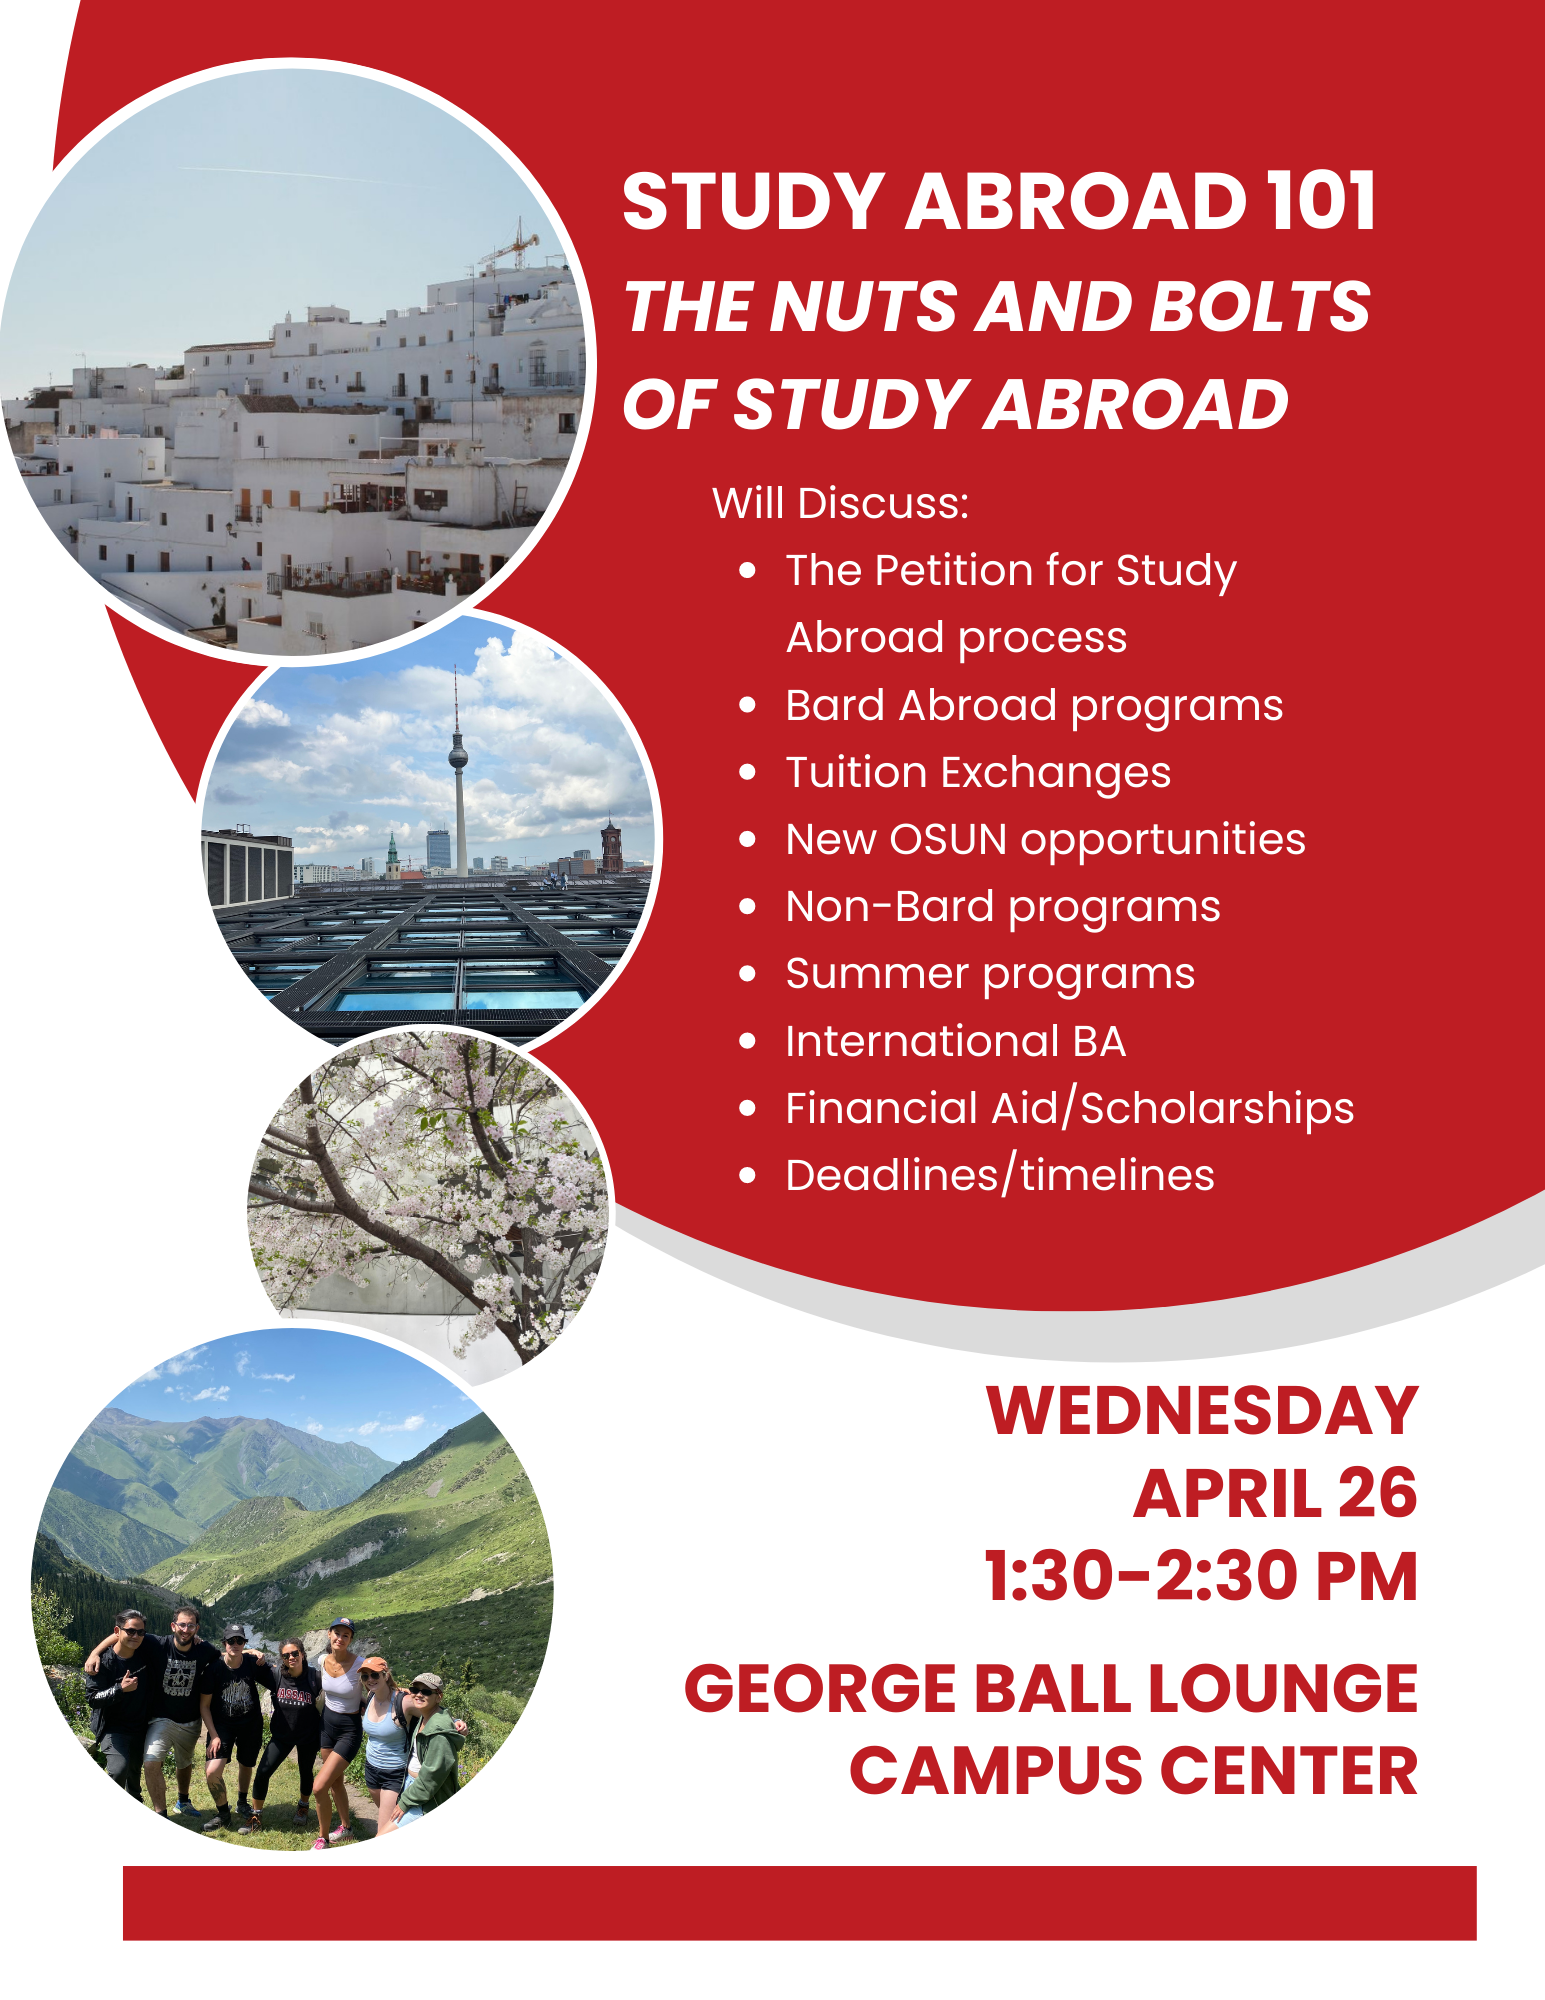 Study Abroad 101: The Nuts And Bolts of Study Abroad at Bard